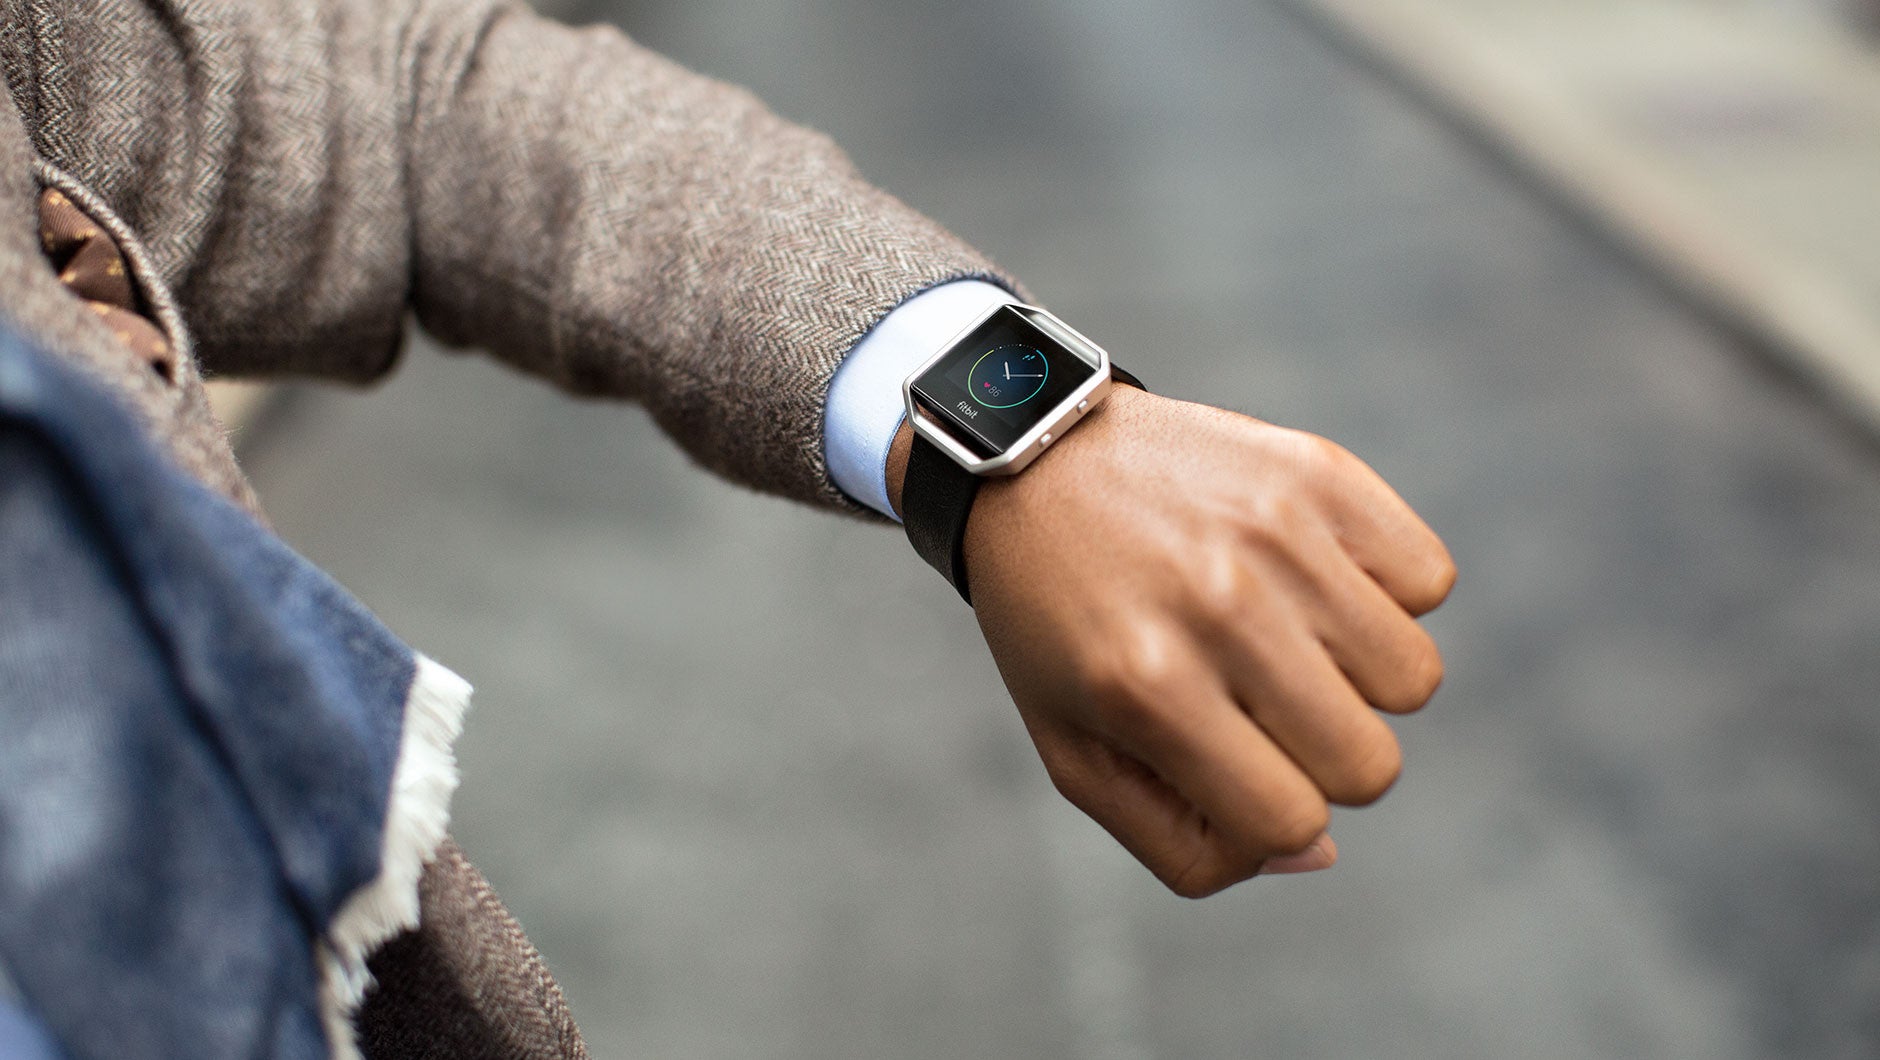 Fitbit Blaze fitness tracker gets more smartwatch-like features in latest software update